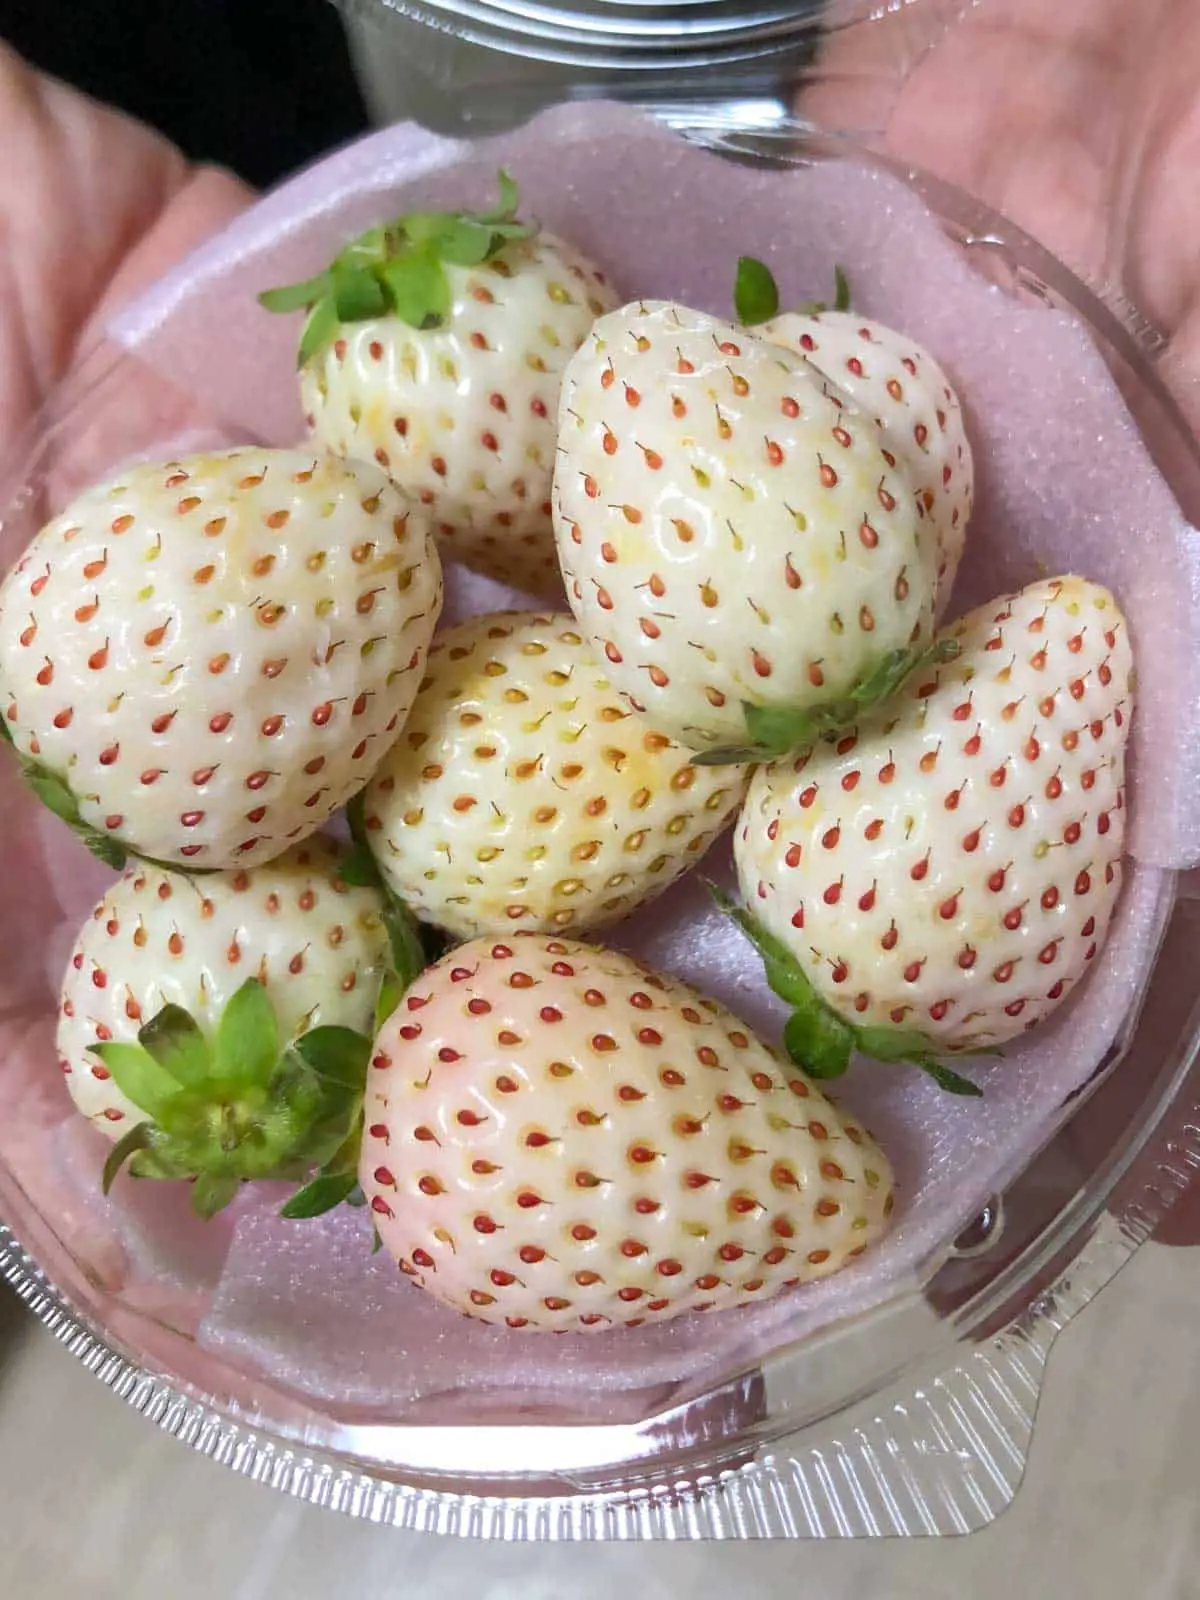 A bowl filled with white strawberries.